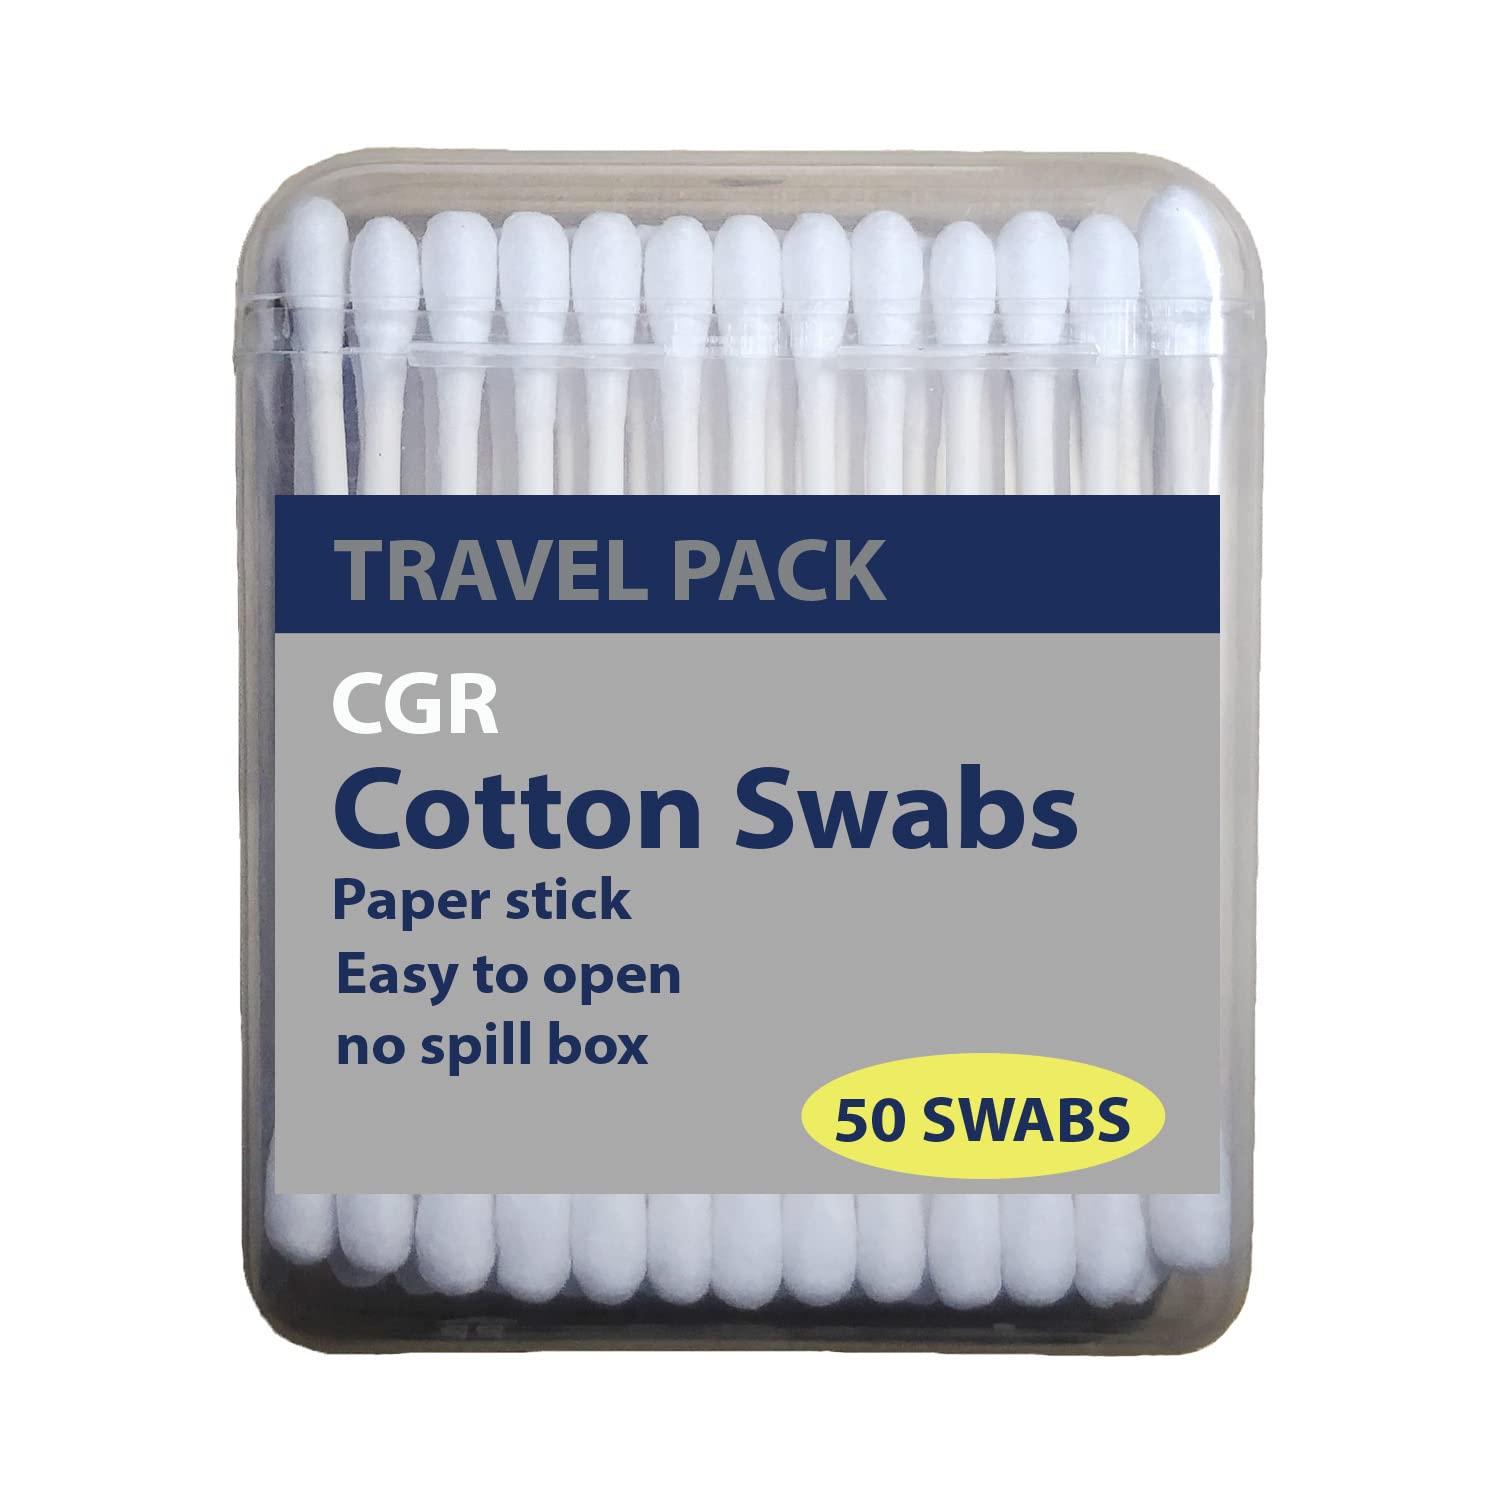  400pcs CGR Organic cotton Swabs, 100% Cotton Double-Tipped,  White Paper Sticks(compostable), Travel Pack(8 Pack of 50 Swabs Total) :  Beauty & Personal Care